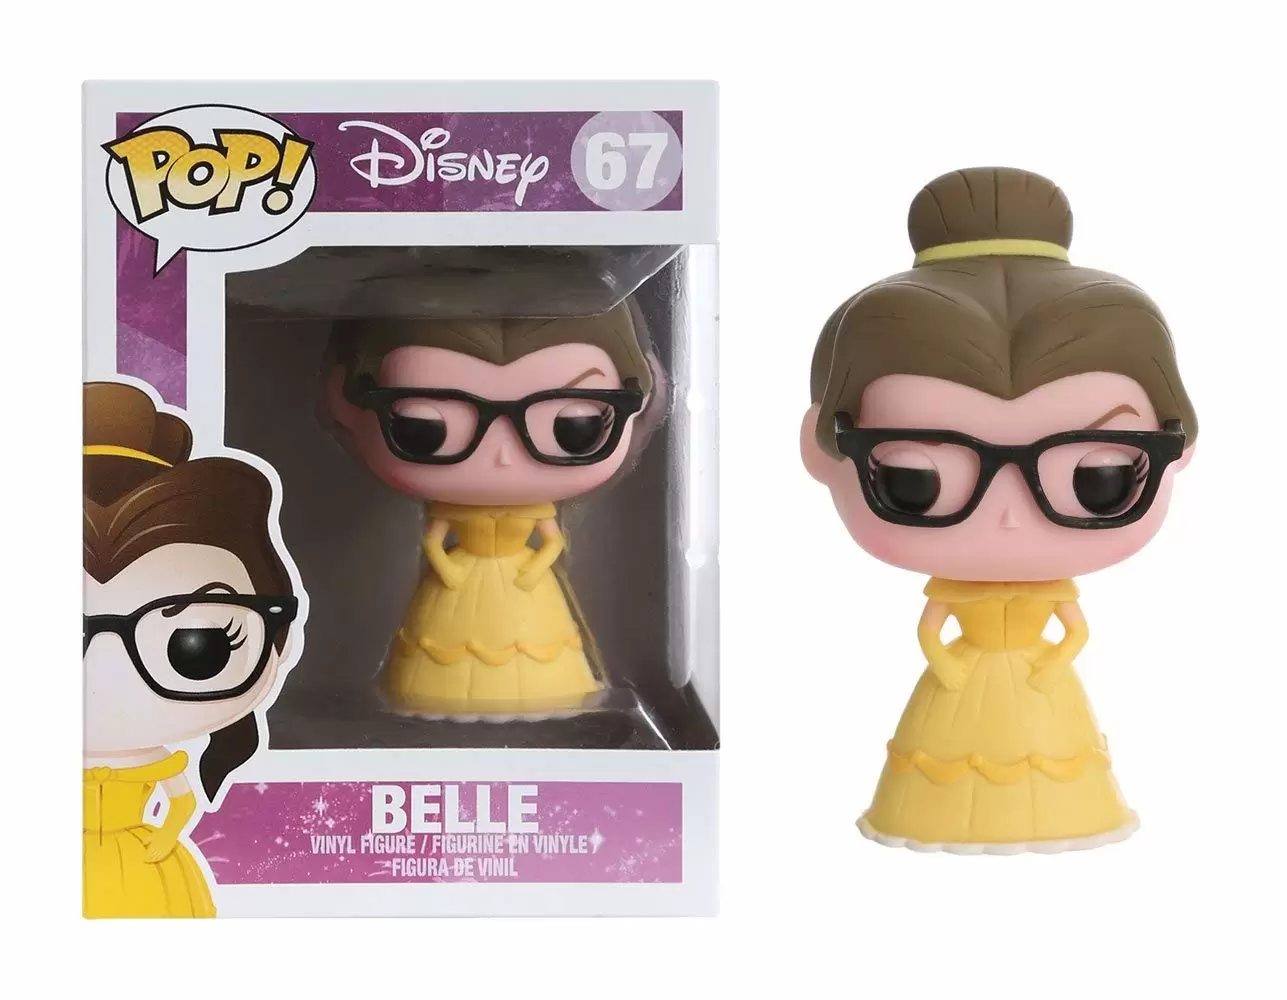 https://thumbs.coleka.com/media/item/201809/25/pop-disney-the-beauty-and-the-beast-hipster-belle-067.webp